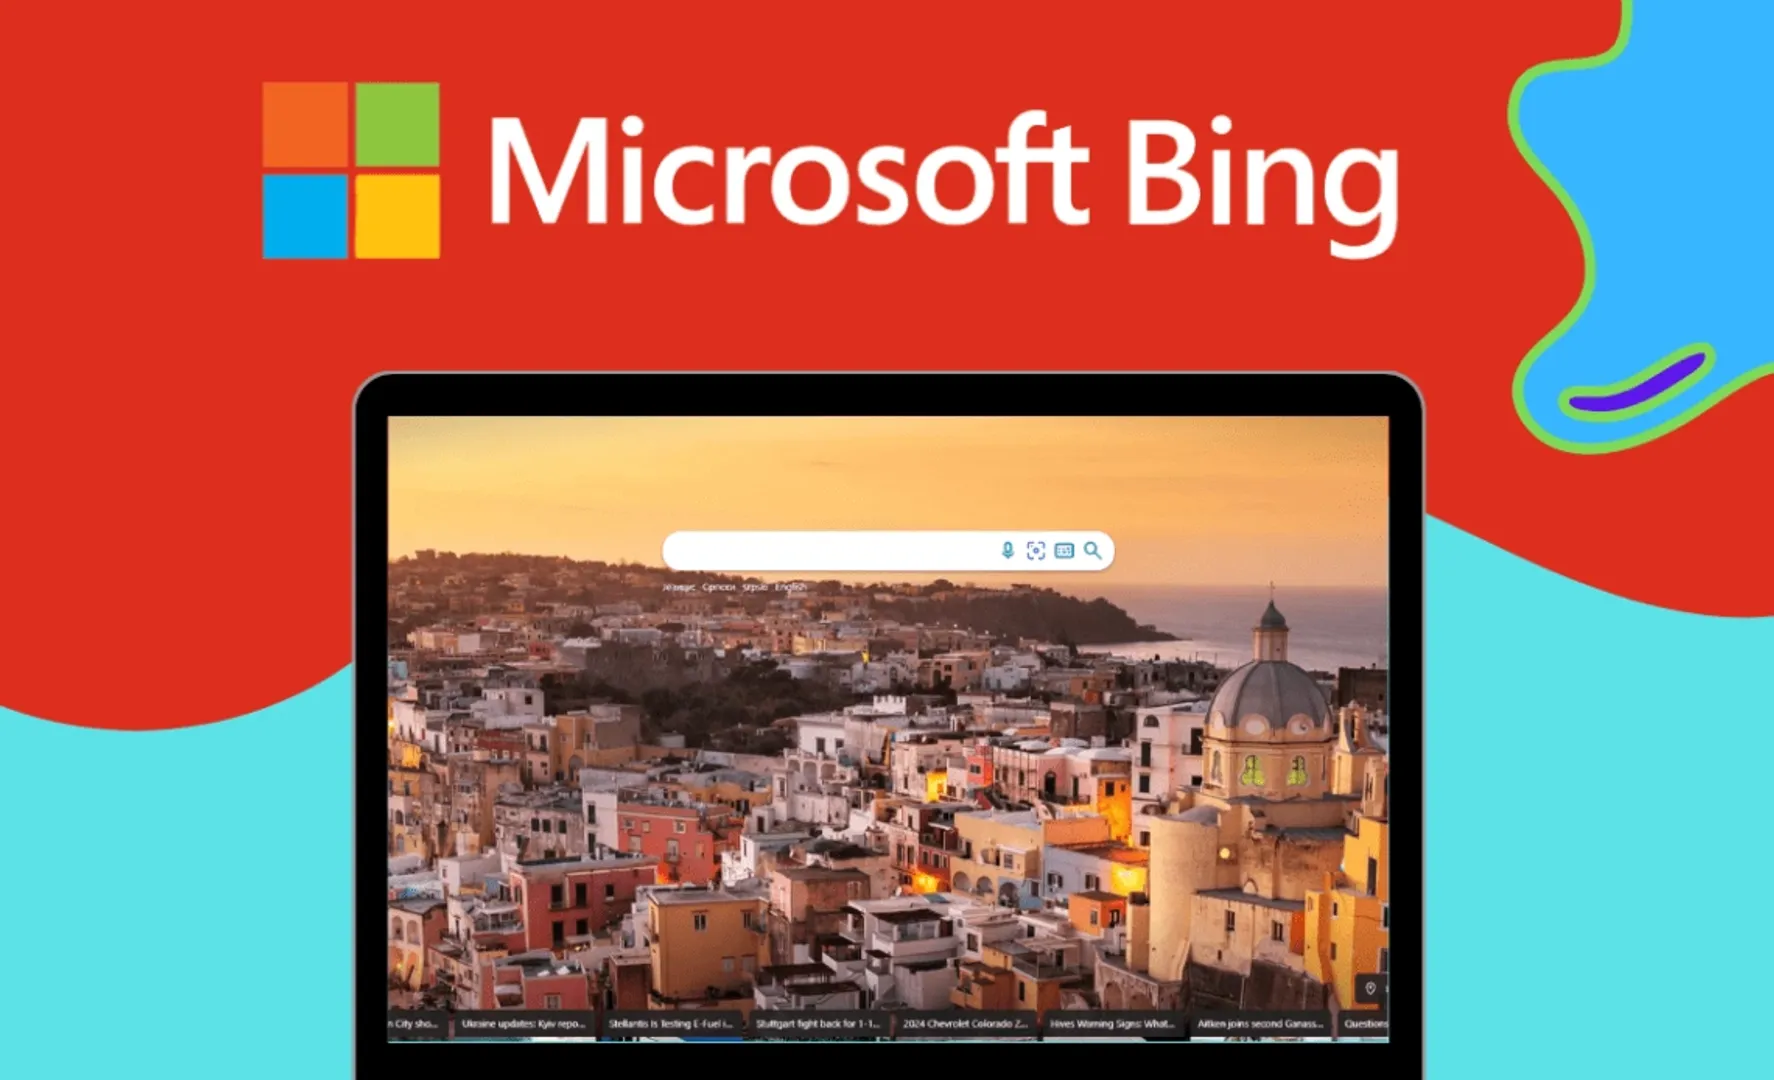 🔍✨ Experience the Power of AI Integration with New Bing Search! 🚀💡

🔎 Smarter Search Engine: Discover the new Bing search from Microsoft, equipped with AI integration and a browser co-pilot. It's more than just search—it's your research assistant, personal planner, and creative partner all in one! 🤝📚💼

💻 Expertise at its Best: Microsoft's vast experience in software and technology shines through with the new Bing search. AI technology takes search functionality to new heights, providing detailed replies and summarized answers to complex questions from search results across the web. 💡🌐

🎯 Accuracy and Trust: Trustworthy search results have always been Bing's hallmark, and the new Bing search is no exception. With AI integration, irrelevant results are eliminated, ensuring users receive the most accurate and helpful information available. ✅🔒

✨ Creative Search Experience: Unleash your creativity with the new Bing search. AI integration offers a personalized experience, providing inspiration and creative ideas for your projects. The chat experience allows for follow-up questions and more detailed answers to your queries. 🎨💬🔍

✅ Benefits:

- More accurate and detailed replies to complex questions

- Summarized answers from search results across the web

- Inspiration and creative ideas for projects

- Personalized search experience with AI technology

- The ability to ask follow-up questions and get more detailed answers

⚠️ Drawbacks:

- Learning curve for fully utilizing the AI integration

- Limited availability of chat experience for certain queries

- Discover the new Bing search and unlock a smarter, more creative search experience! 🌟💻✨

🚀 Ready to explore the power of AI integration with the new Bing search? Learn how Microsoft's latest innovation takes search functionality to the next level. 

Share your thoughts on the new Bing search and how it enhances your search experience. Let's engage in a conversation! 💬🌐

Read the full review 👉  https://webthat.io/bing/